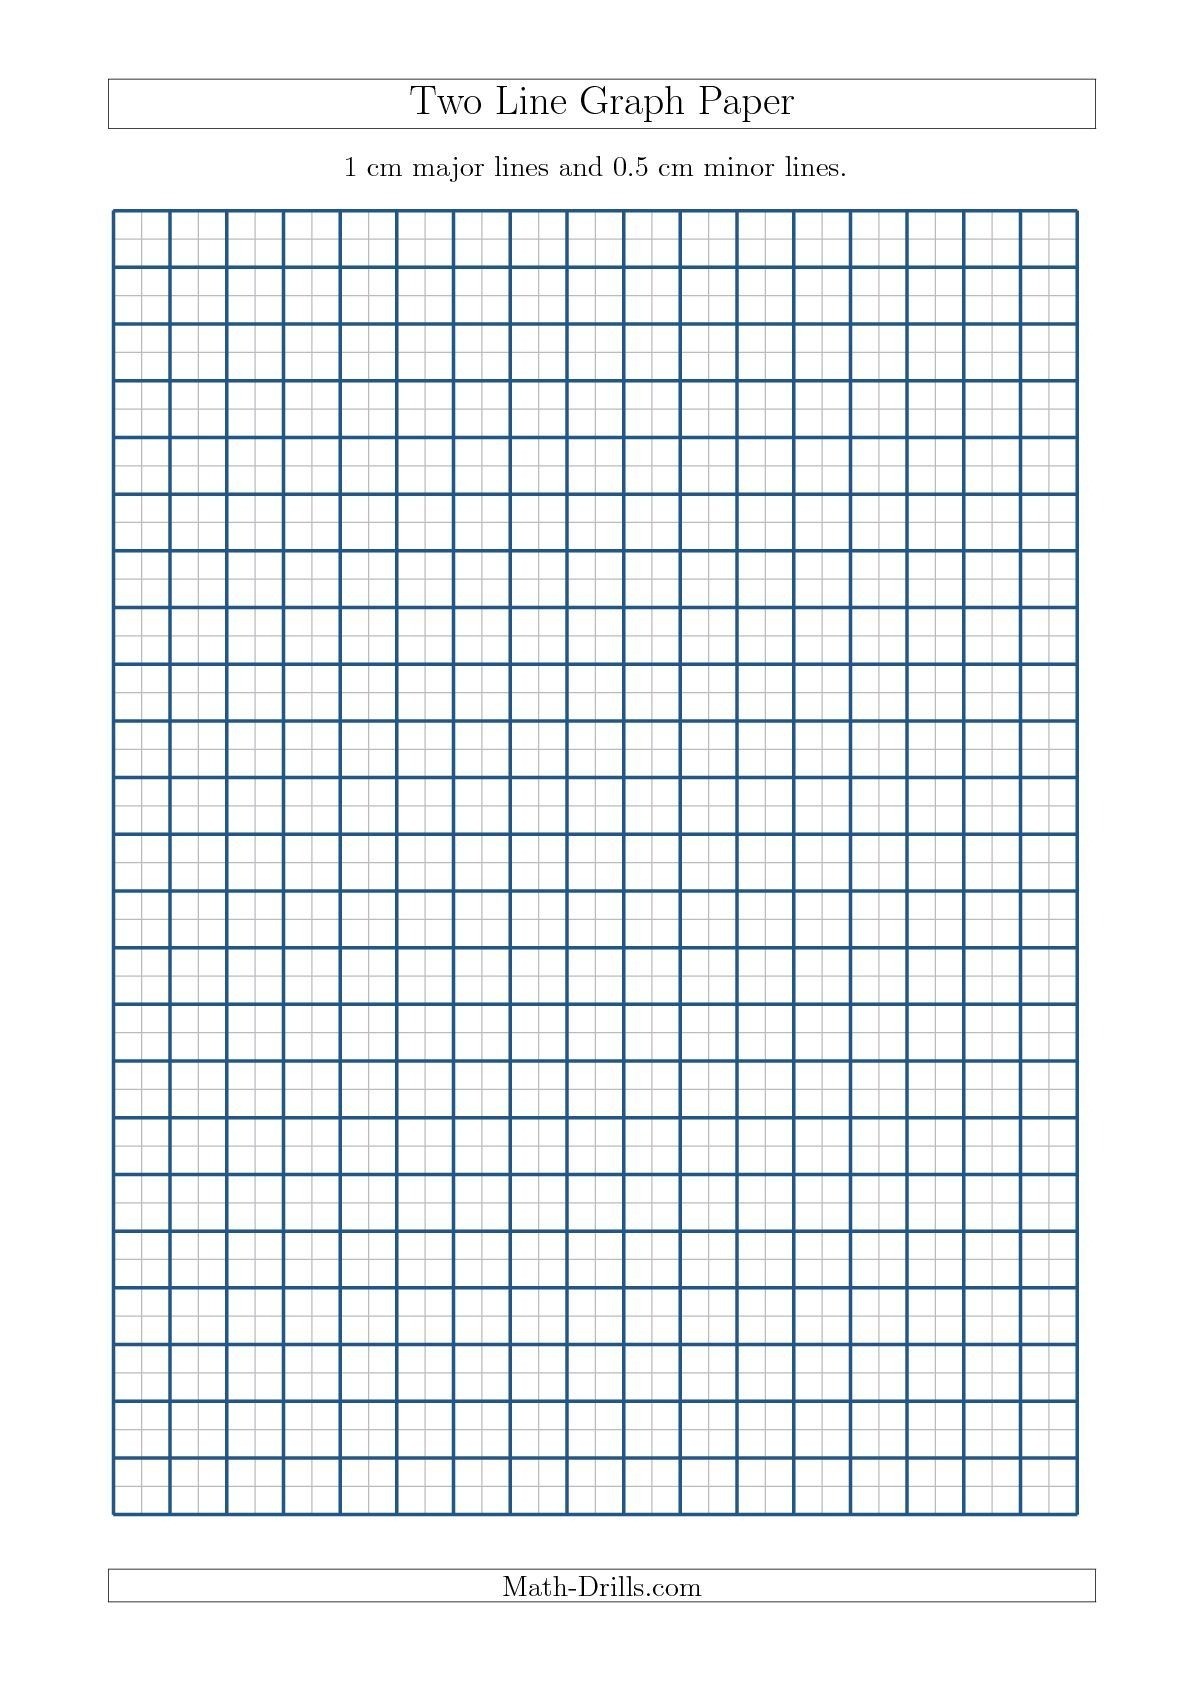 Two Line Graph Paper With 1 Cm Major Lines And 0.5 Cm Minor Throughout 1 Cm Graph Paper Template Word